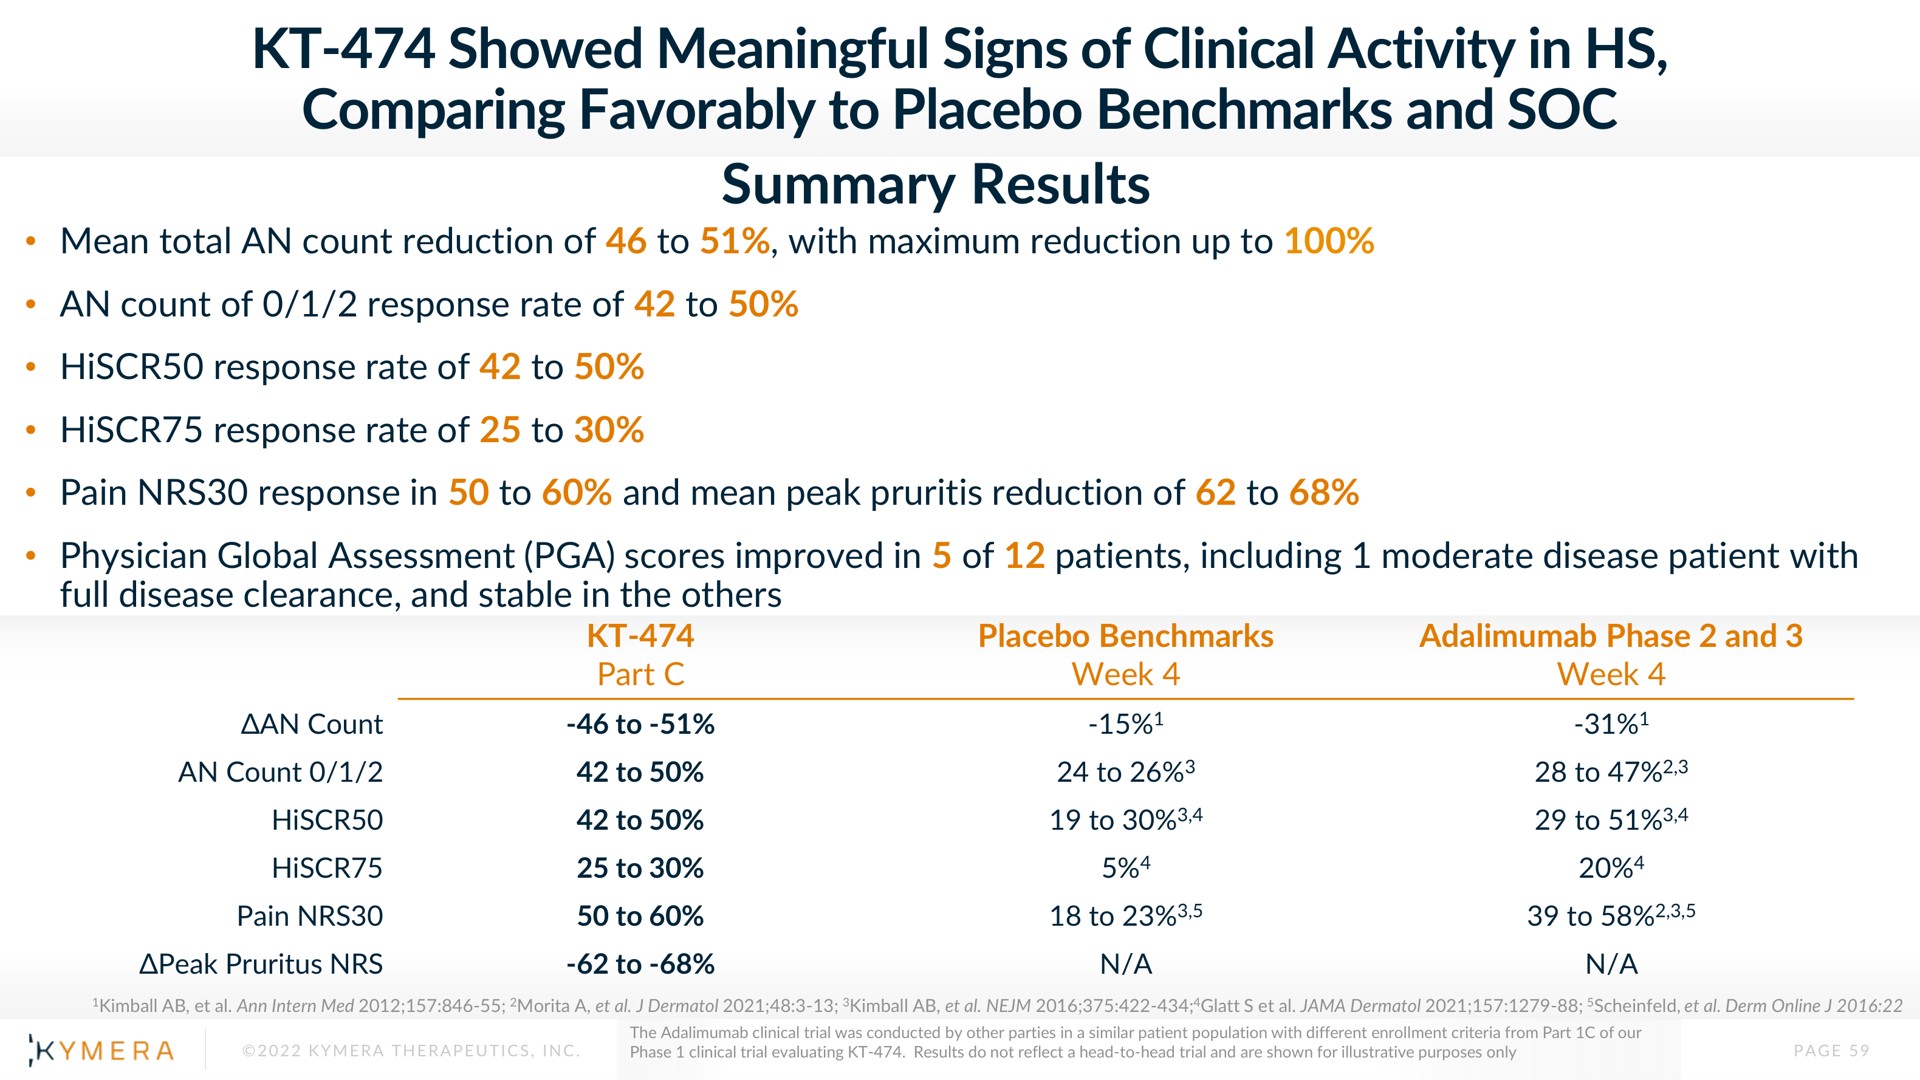 showed meaningful signs of clinical activity in comparing favorably to placebo and soc summary results | Kymera